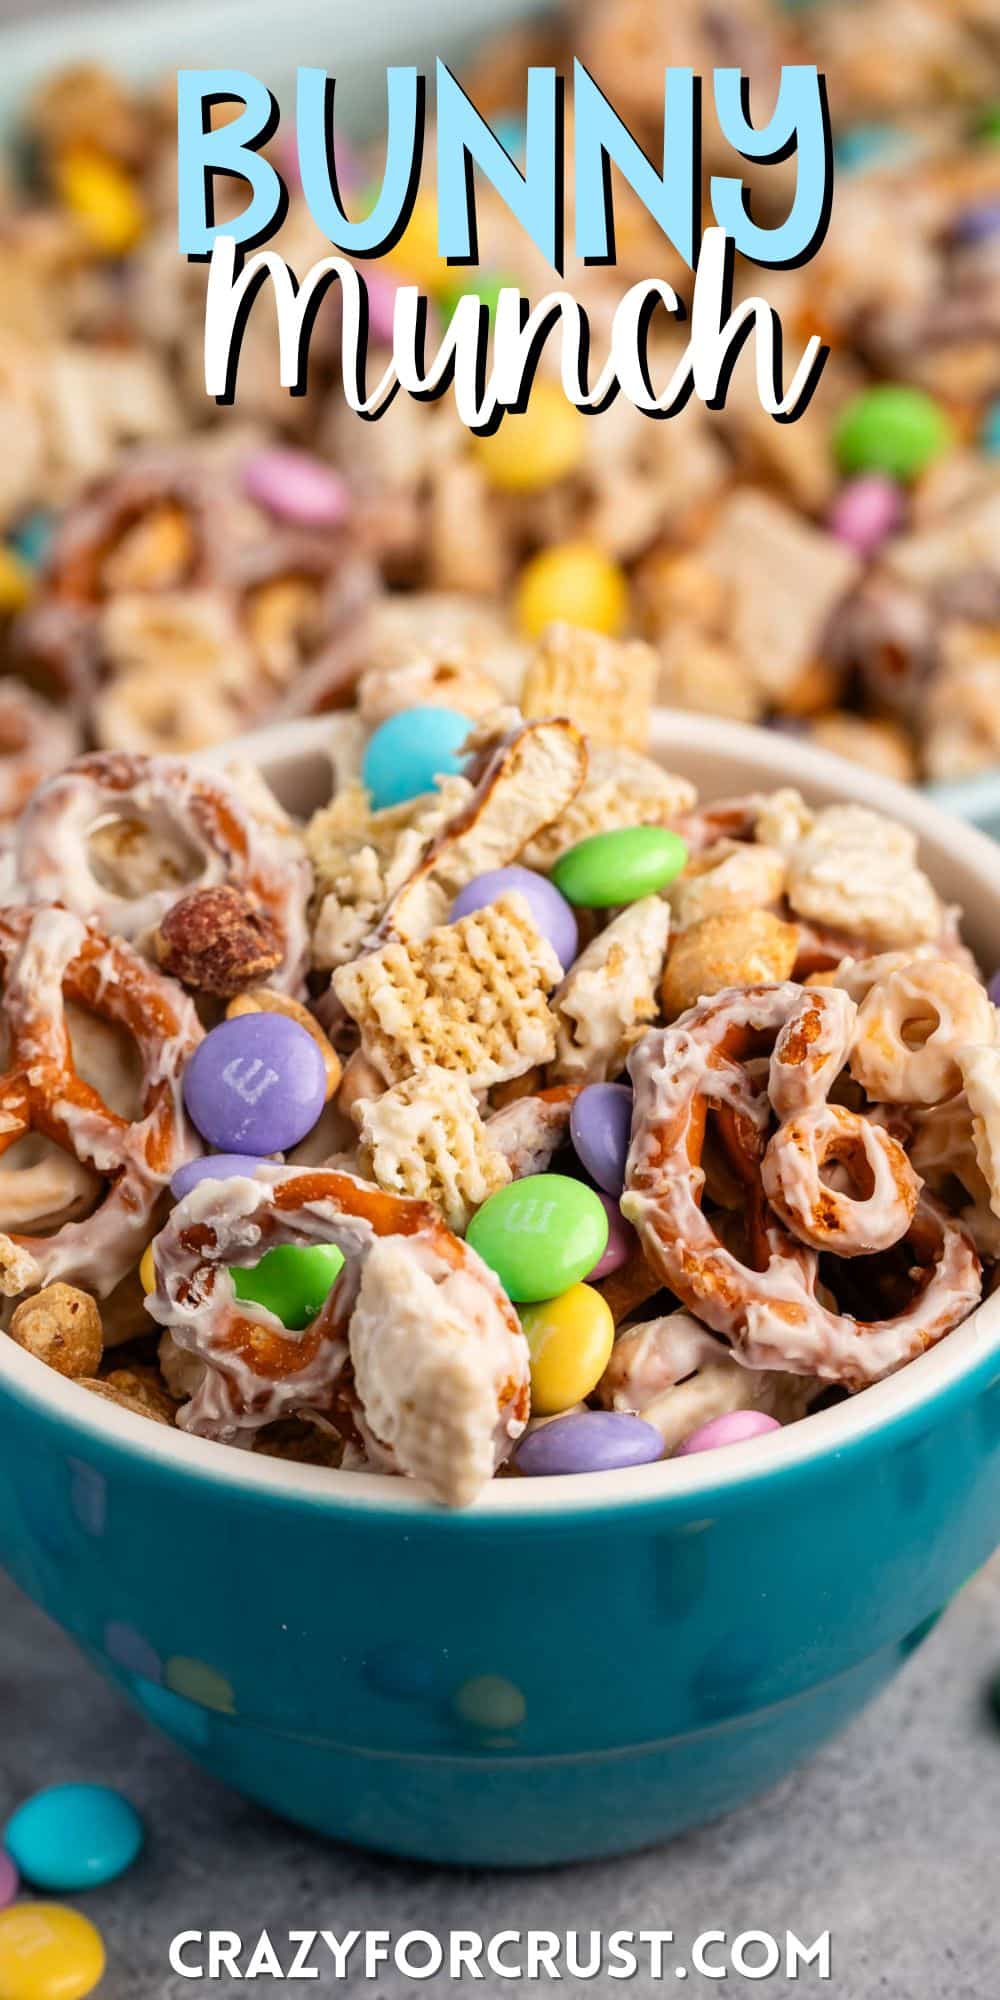 bunny munch mixed in a teal bowl with white chocolate with words on the image.